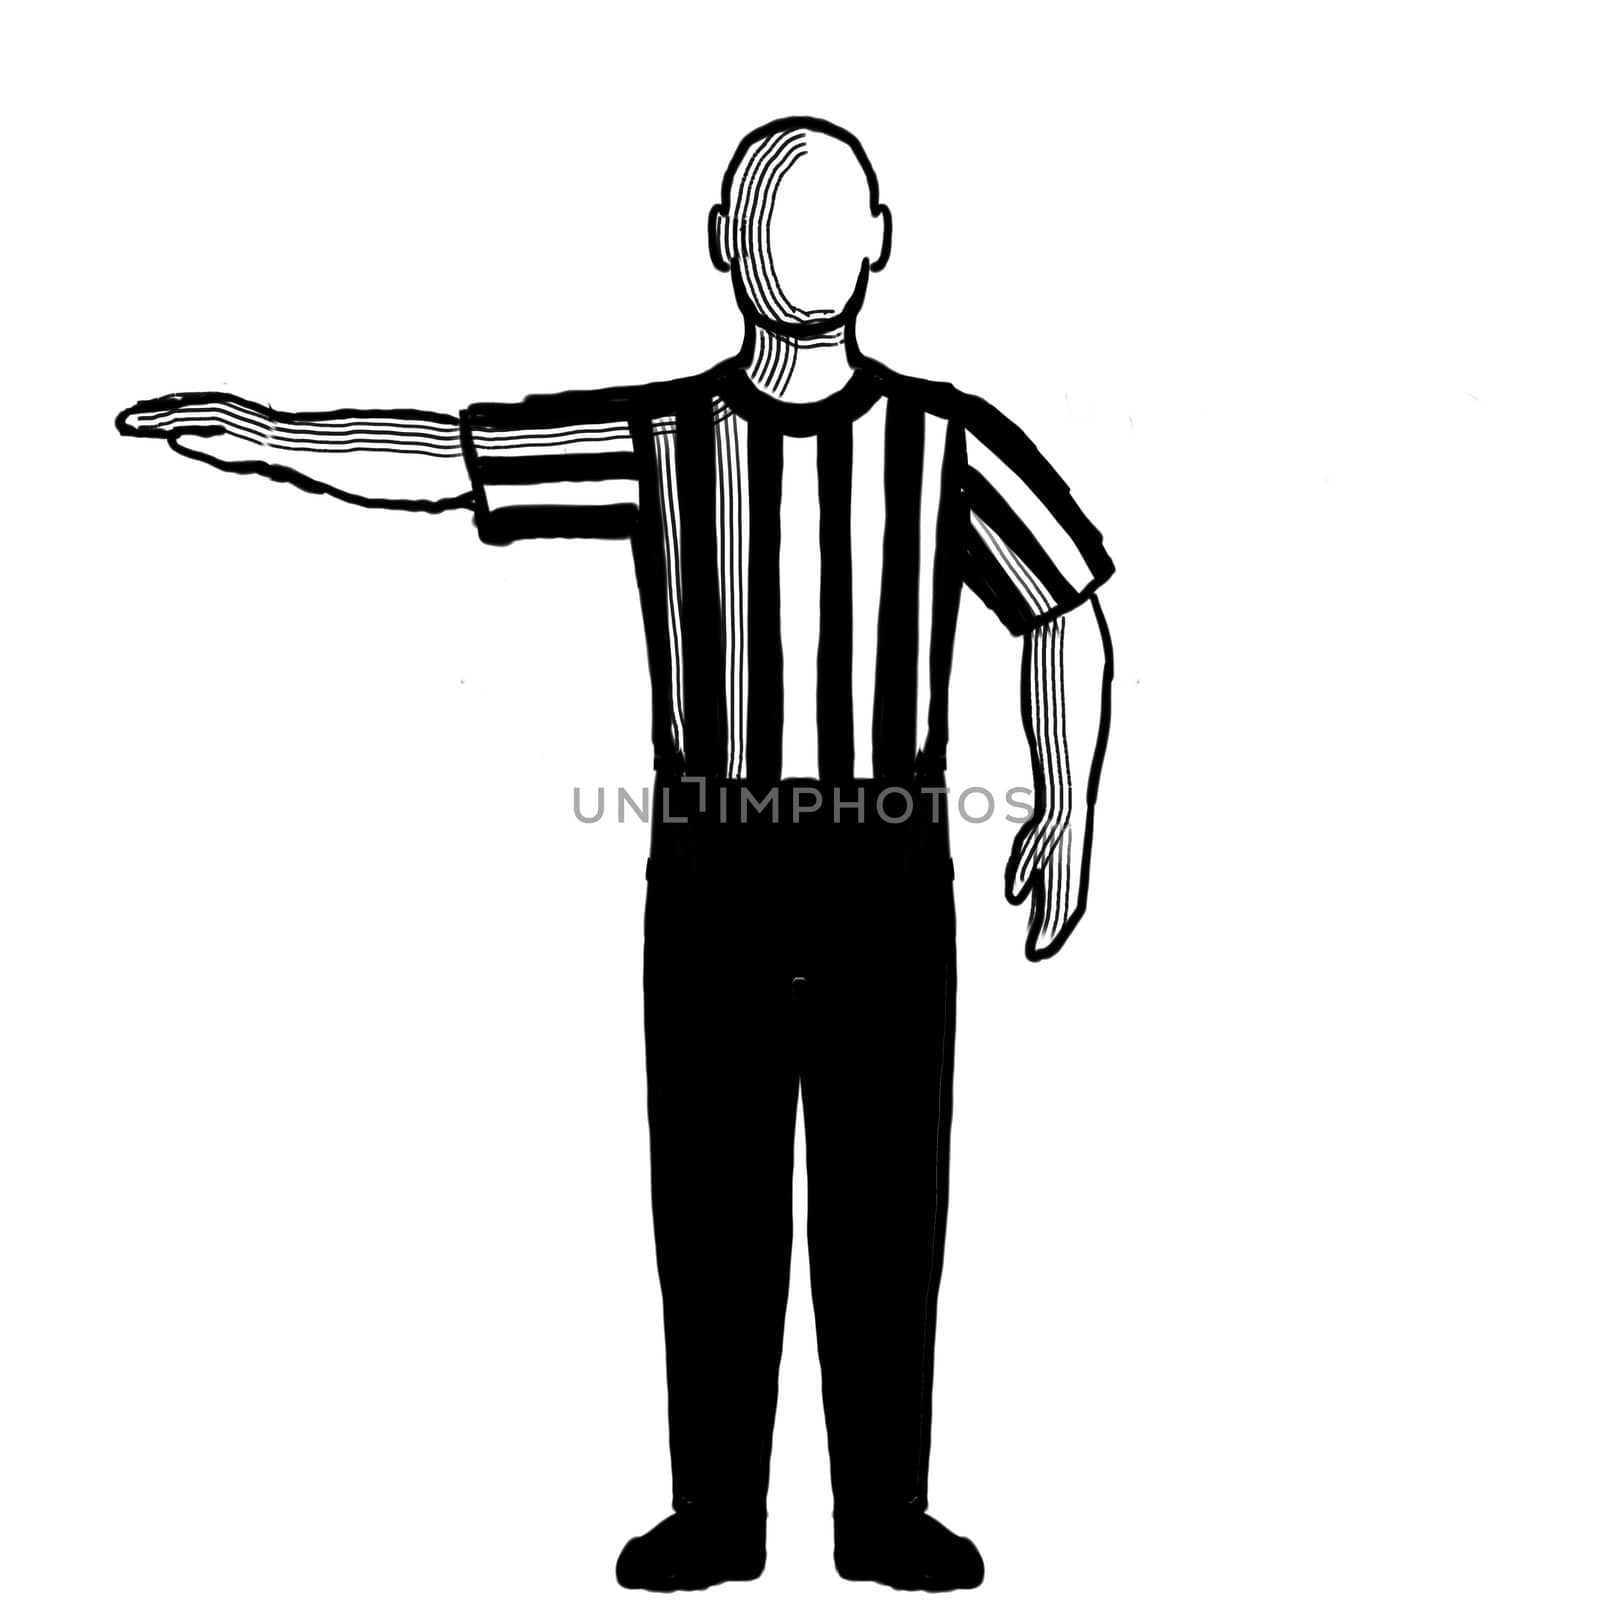 Basketball Referee visible count Hand Signal Retro Black and White by patrimonio